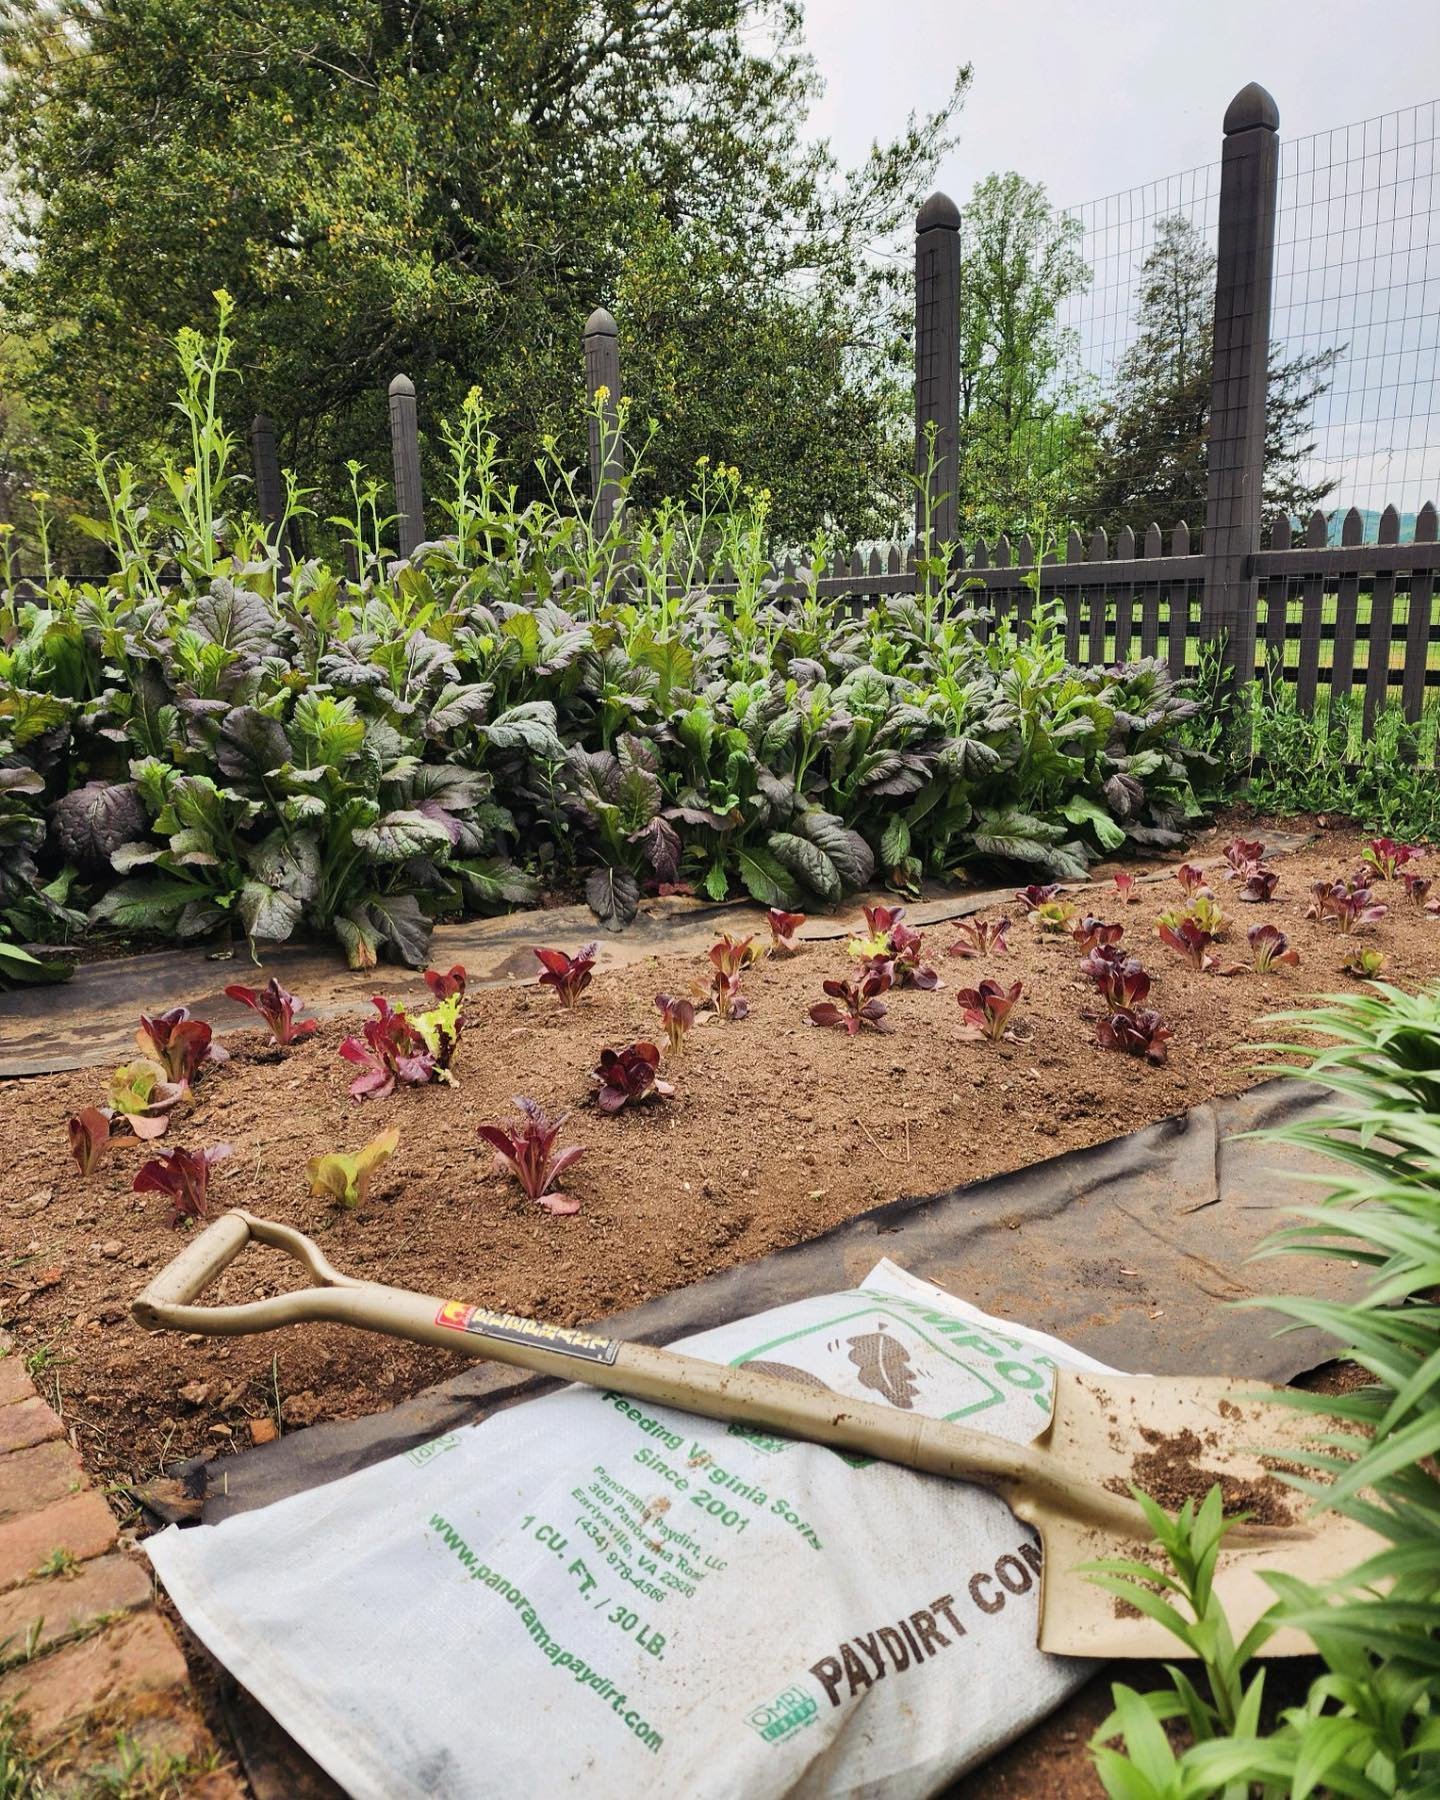 We will have bags of Panorama Paydirt Organic Compost for sale at the Piedmont Master Gardeners Spring Plant Sale TOMORROW at Albemarle Square starting at 10am. Proceeds will benefit the PMG. Hope to see you there! #feedyoursoil #plantsale #compost #